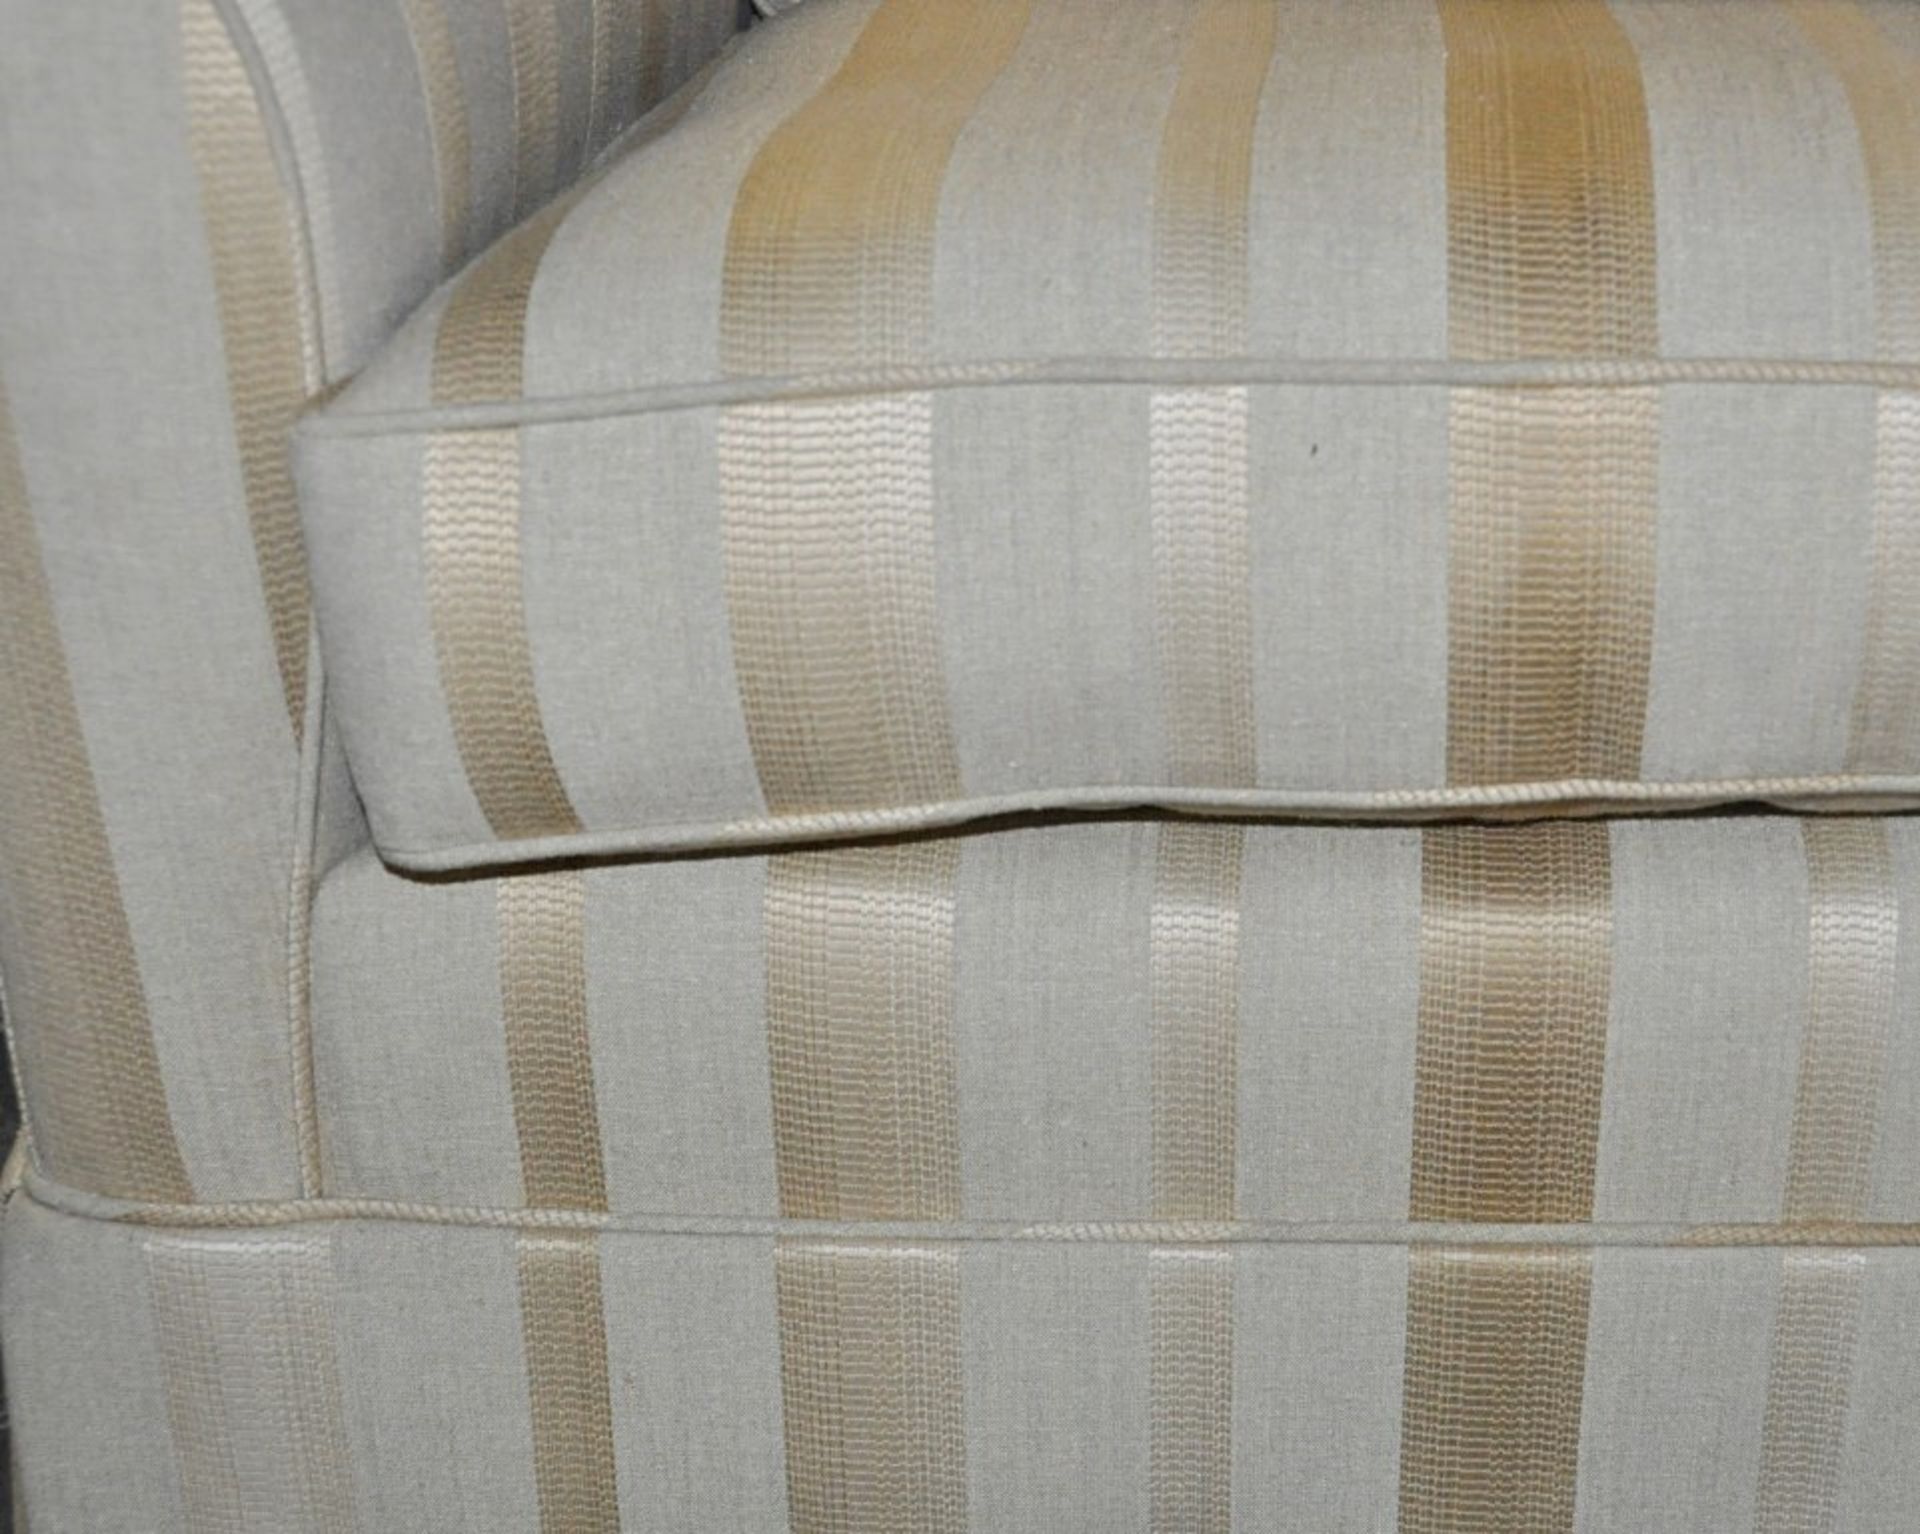 1 x 3 Seater & 2 Seater Luxury Sofa Set by Duresta – Comes in a Lewis Stripe – Fantastic Quality - Image 3 of 3